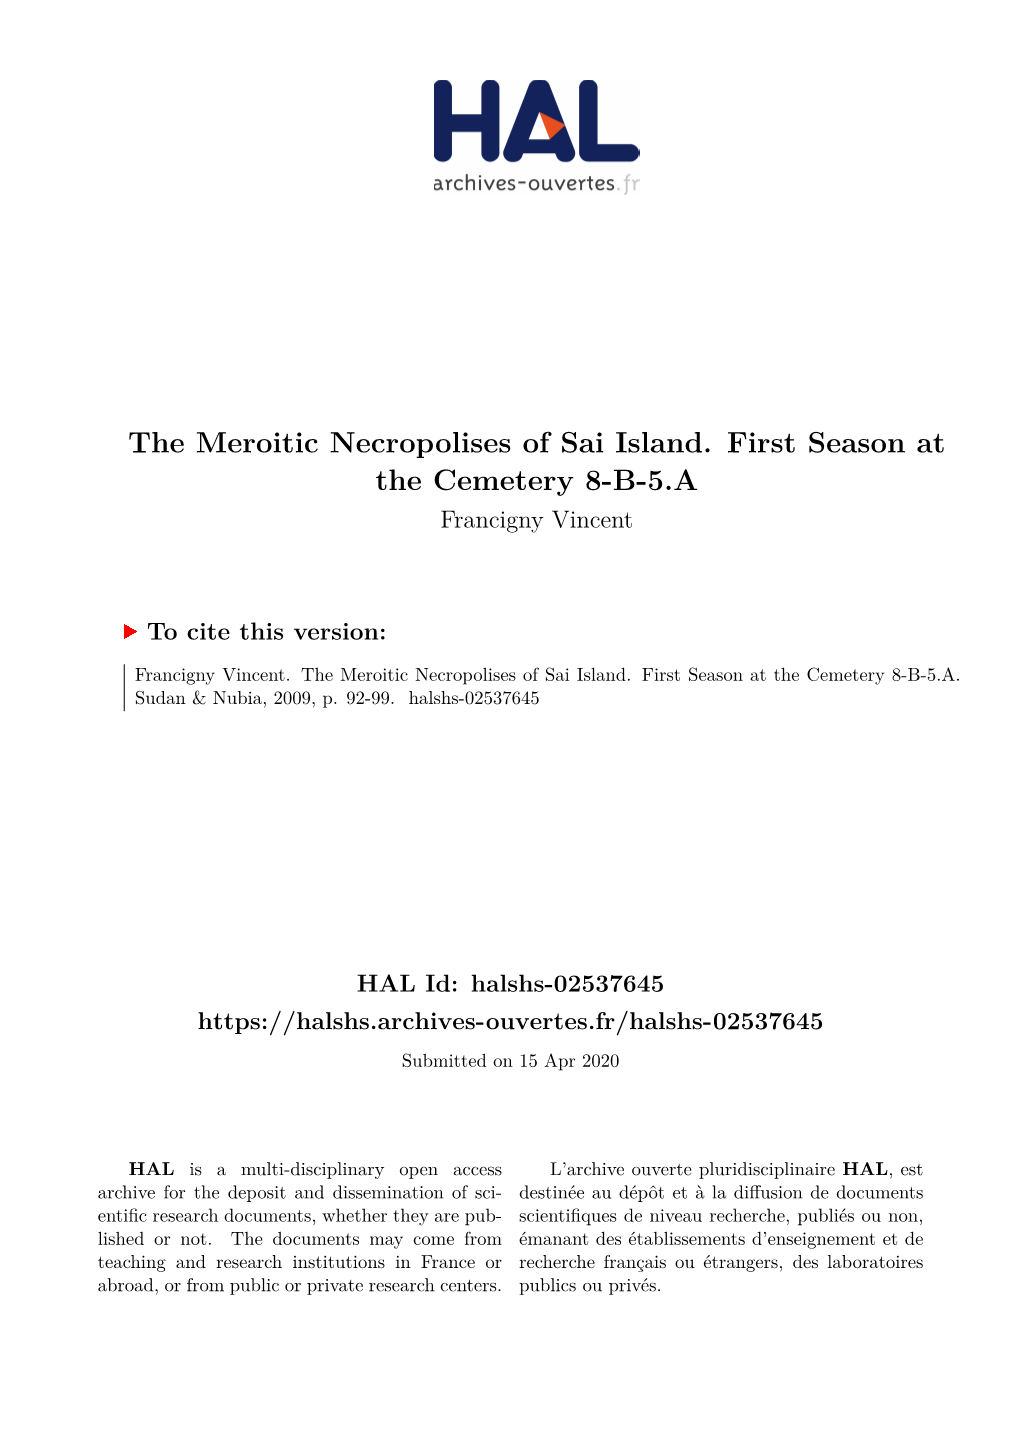 The Meroitic Necropolises of Sai Island. First Season at the Cemetery 8-B-5.A Francigny Vincent